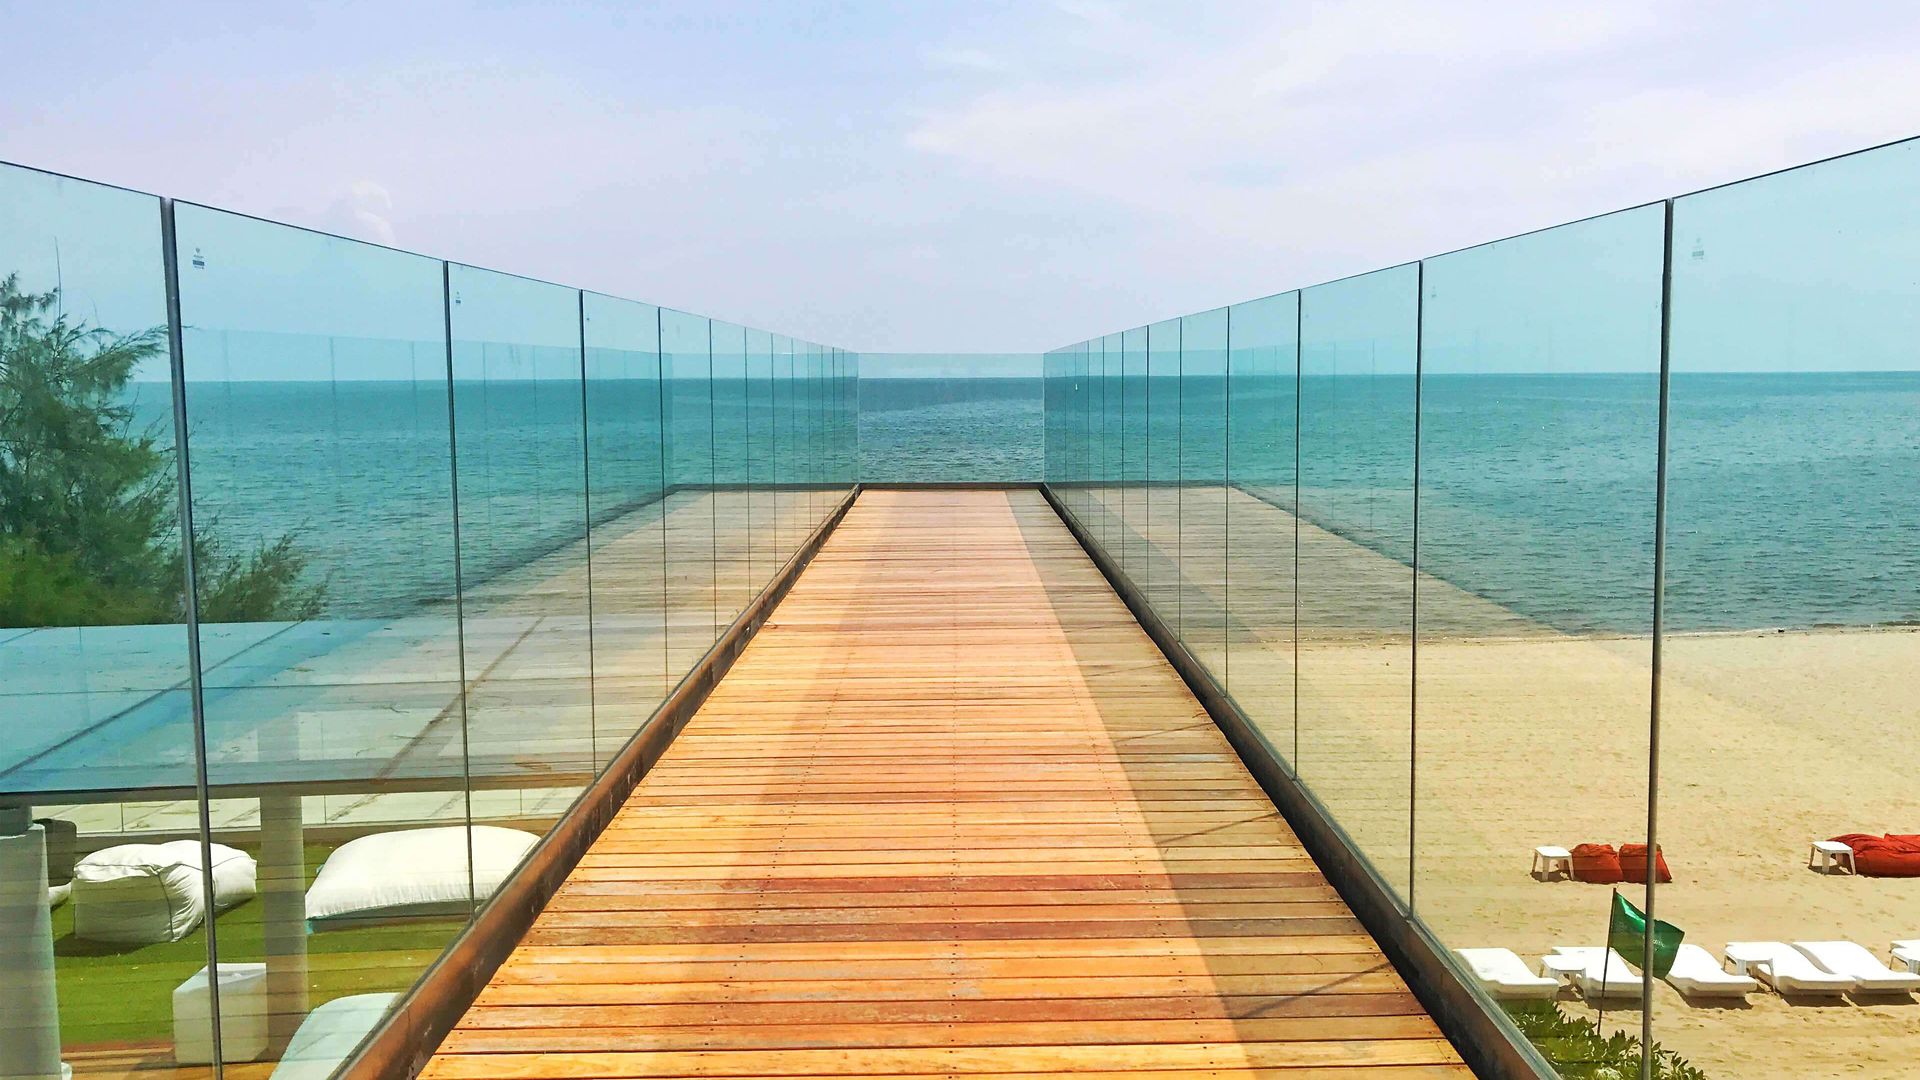 Glass railing on beach boardwalk, glass wall grouting and weather resistant sealing.